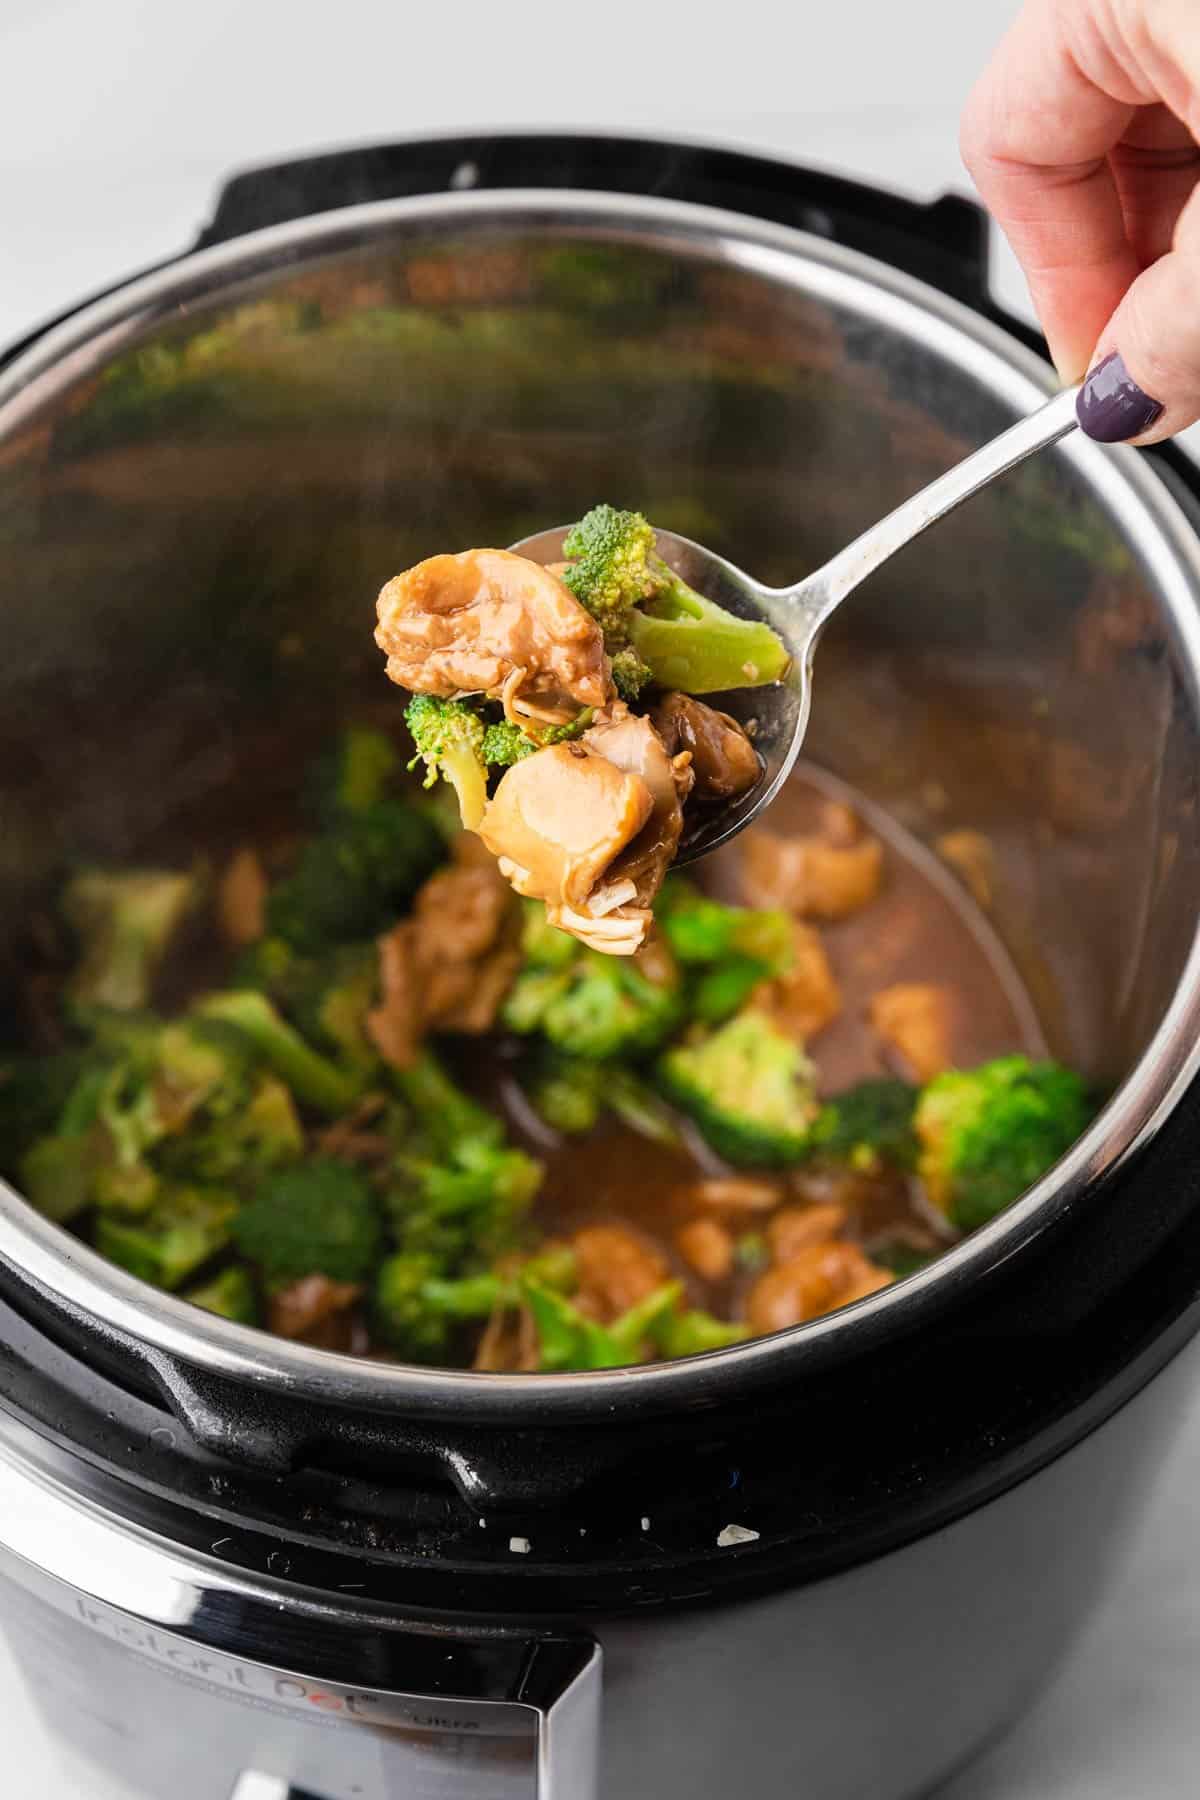 the instant pot chicken and broccoli recipe completed